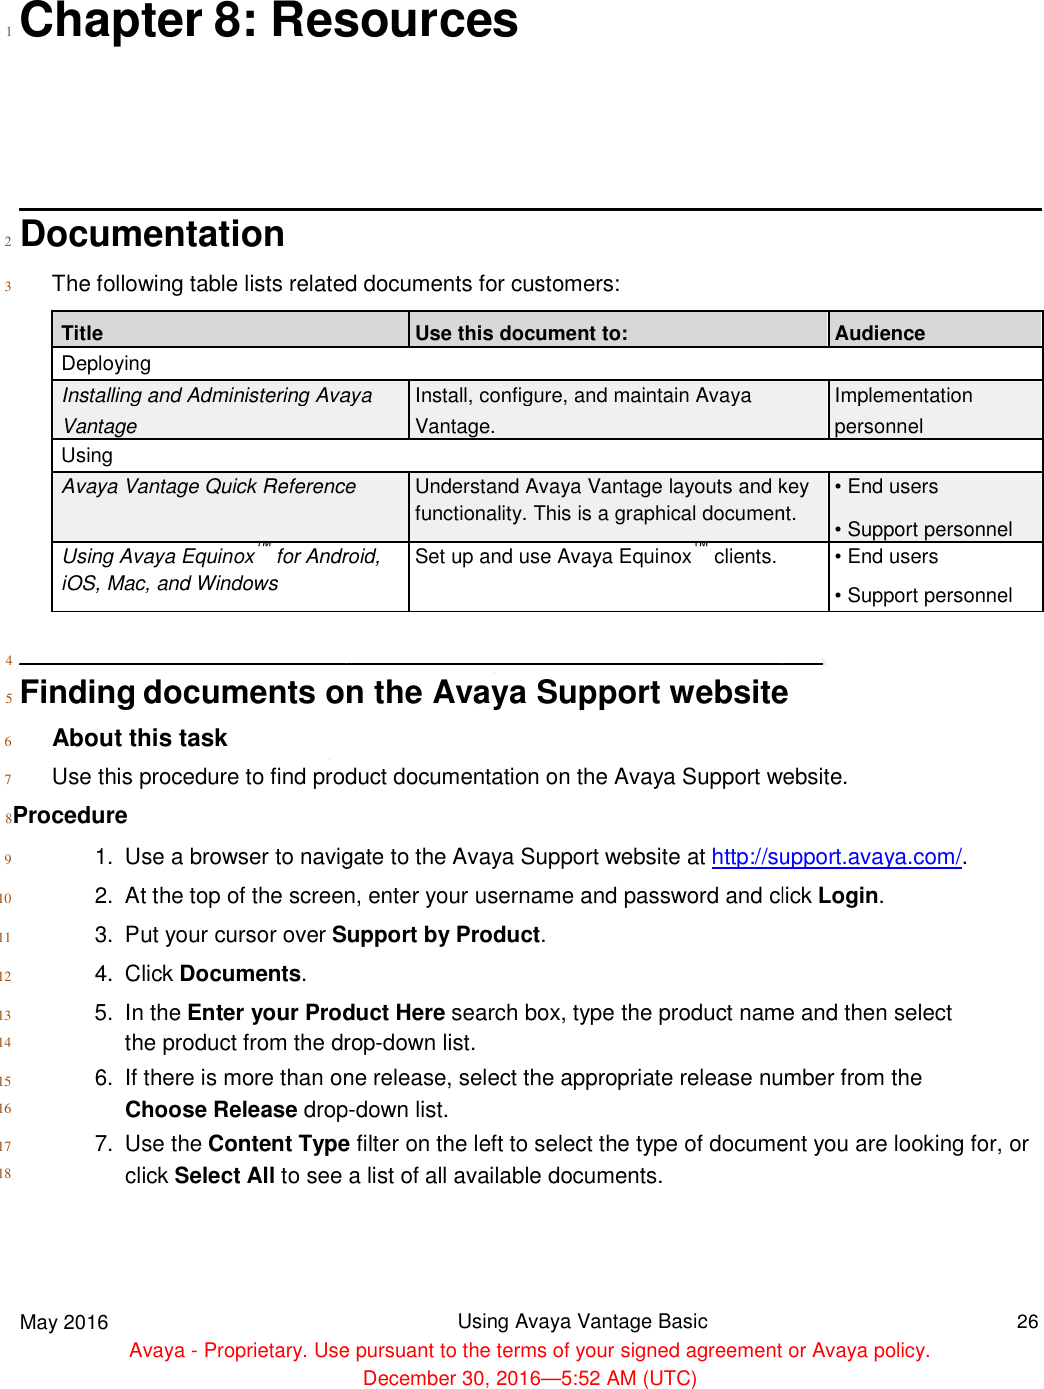   1  Chapter 8: Resources        2 Documentation  3 The following table lists related documents for customers: Title Deploying  Installing and Administering AvayaVantage Using  Avaya Vantage Quick Reference  Using Avaya Equinox™ for Android,iOS, Mac, and Windows    4  5  Finding documents on the Avaya Support website 6 About this task  7 Use this procedure to find product 8Procedure  9  10  11  12  13  14  15  16  17  18   1. Use a browser to navigate to the Avaya Support website at  2. At the top of the screen, enter your username and password and click  3.  Put your cursor over Support by Product 4.  Click Documents.  5.  In the Enter your Product Herethe product from the drop 6. If there is more than one release, select the appropriate release number from the Choose Release drop 7.  Use the Content Typeclick Select All to see a list of all available     May 2016  Avaya - Proprietary. Use pursuant to the terms of your signed agreement or Avaya policy. 8: Resources The following table lists related documents for customers: Use this document to:   Avaya Install, configure, and maintain Avaya Vantage.   Avaya Vantage Quick Reference Understand Avaya Vantage layouts and keyfunctionality. This is a graphical document. for Android, Set up and use Avaya Equinox™ clients.    documents on the Avaya Support websiteUse this procedure to find product documentation on the Avaya Support website.Use a browser to navigate to the Avaya Support website at http://support.avaya.com/At the top of the screen, enter your username and password and click Support by Product. Enter your Product Here search box, type the product name and then select the product from the drop-down list. If there is more than one release, select the appropriate release number from the drop-down list. Content Type filter on the left to select the type of document you are looking for, or to see a list of all available documents. Using Avaya Vantage Basic Proprietary. Use pursuant to the terms of your signed agreement or Avaya policy.December 30, 2016—5:52 AM (UTC) Audience      Implementation  personnel      Understand Avaya Vantage layouts and key • End users  functionality. This is a graphical document. • Support personnel    • End users  • Support personnel     documents on the Avaya Support website documentation on the Avaya Support website. http://support.avaya.com/. At the top of the screen, enter your username and password and click Login. search box, type the product name and then select If there is more than one release, select the appropriate release number from the filter on the left to select the type of document you are looking for, or 26 Proprietary. Use pursuant to the terms of your signed agreement or Avaya policy. 